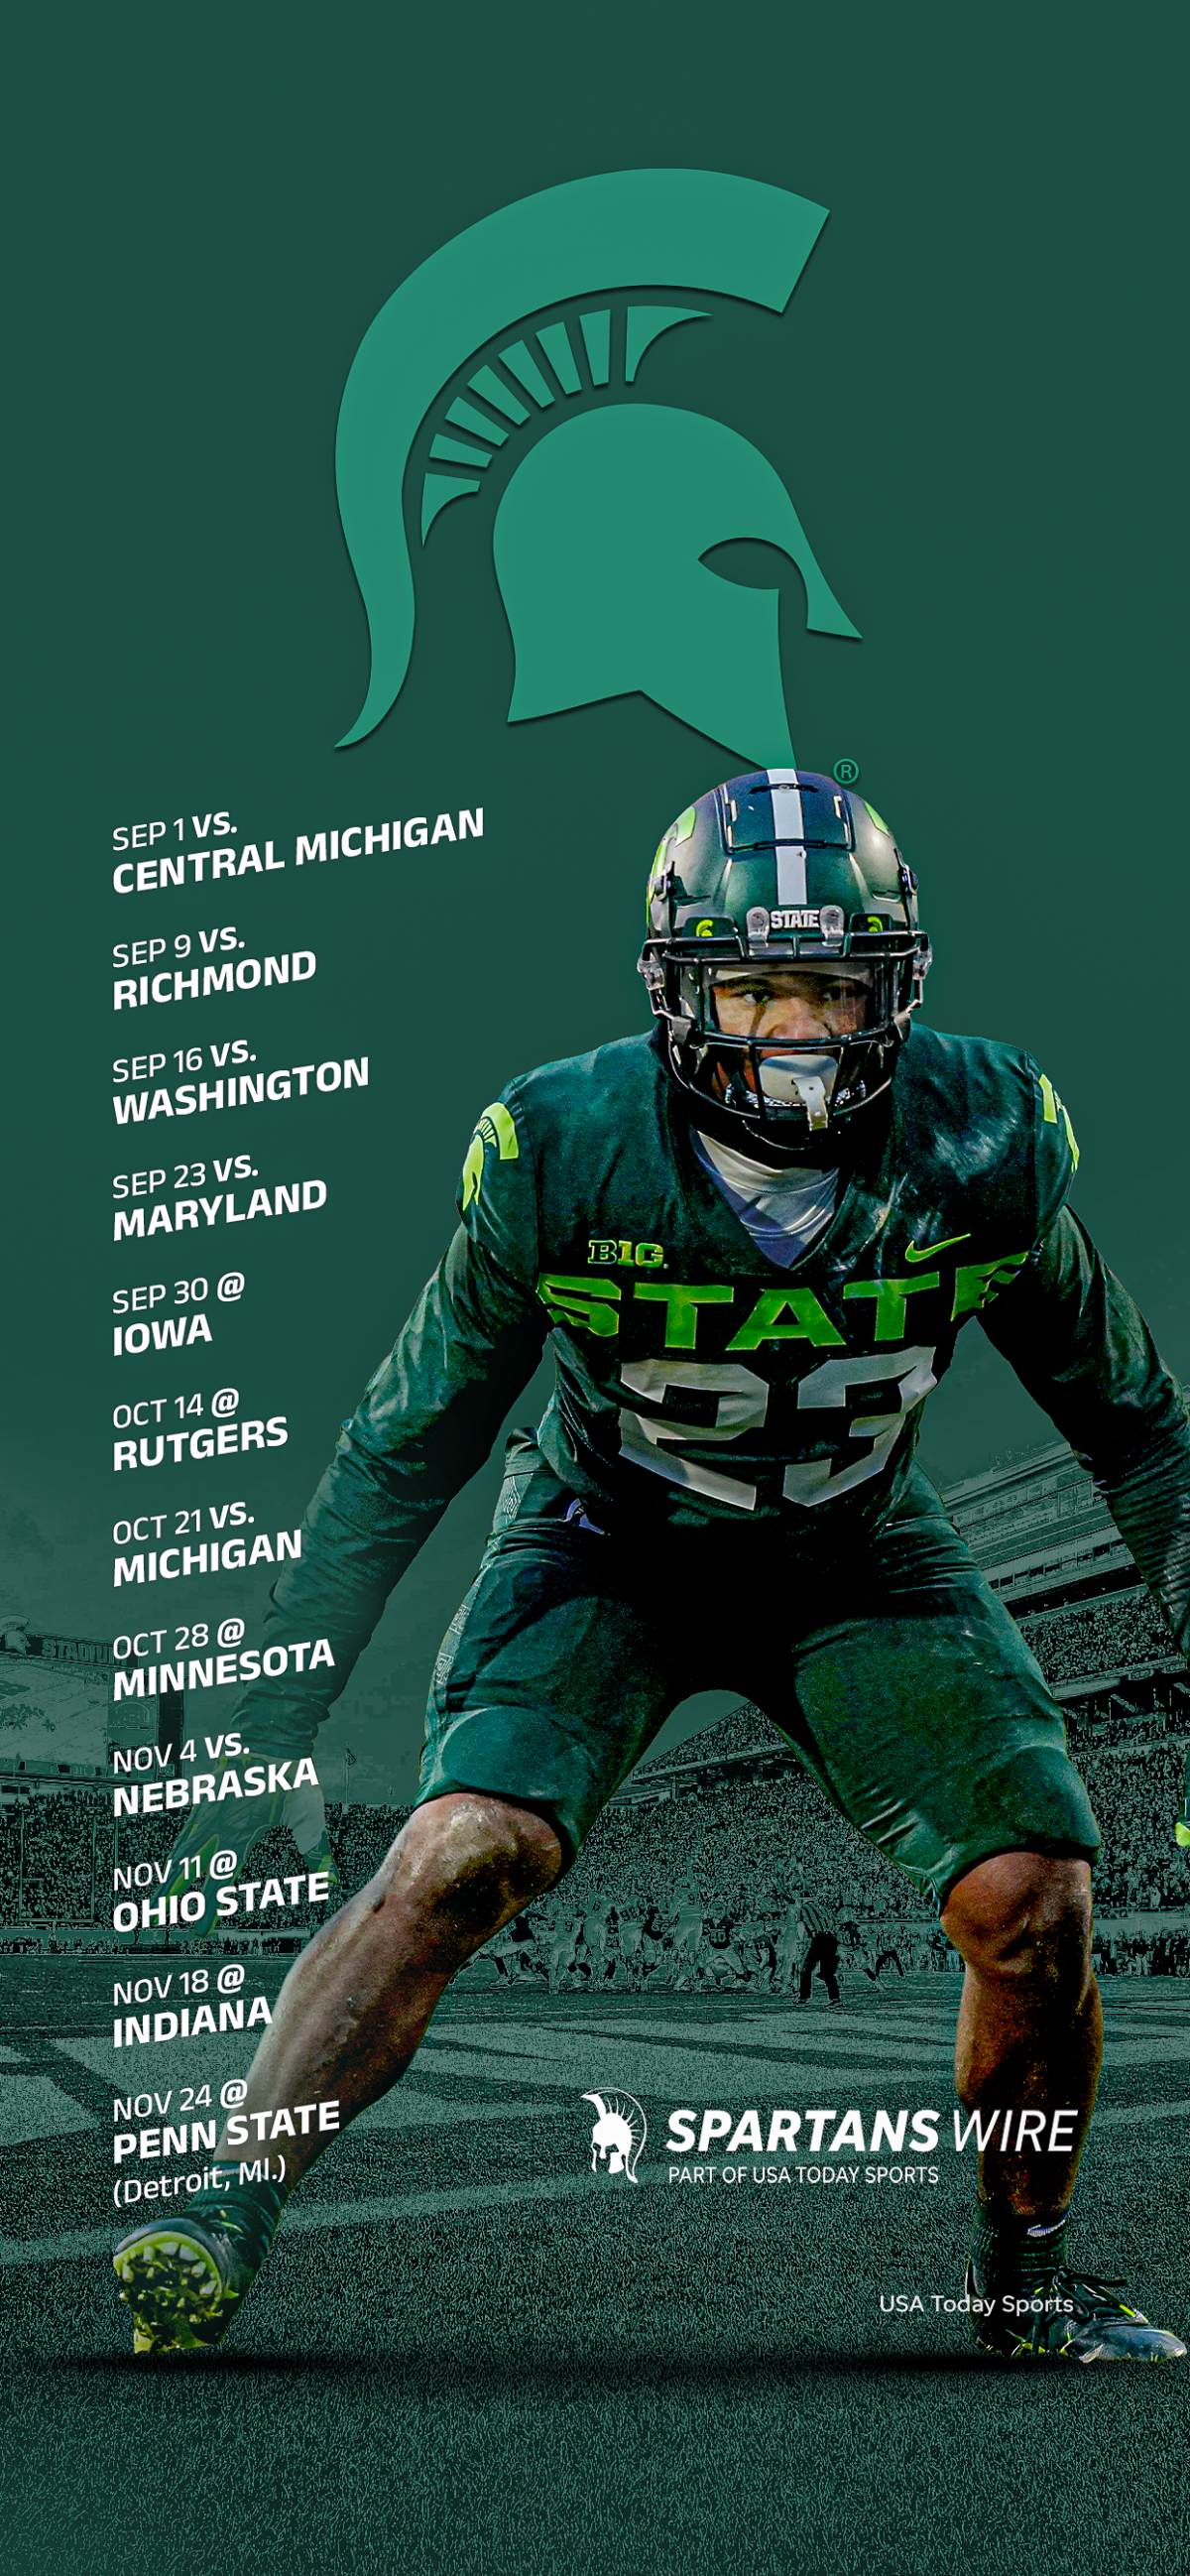 2023 Michigan State Spartans Football Schedule: Downloadable Smartphone Wallpaper